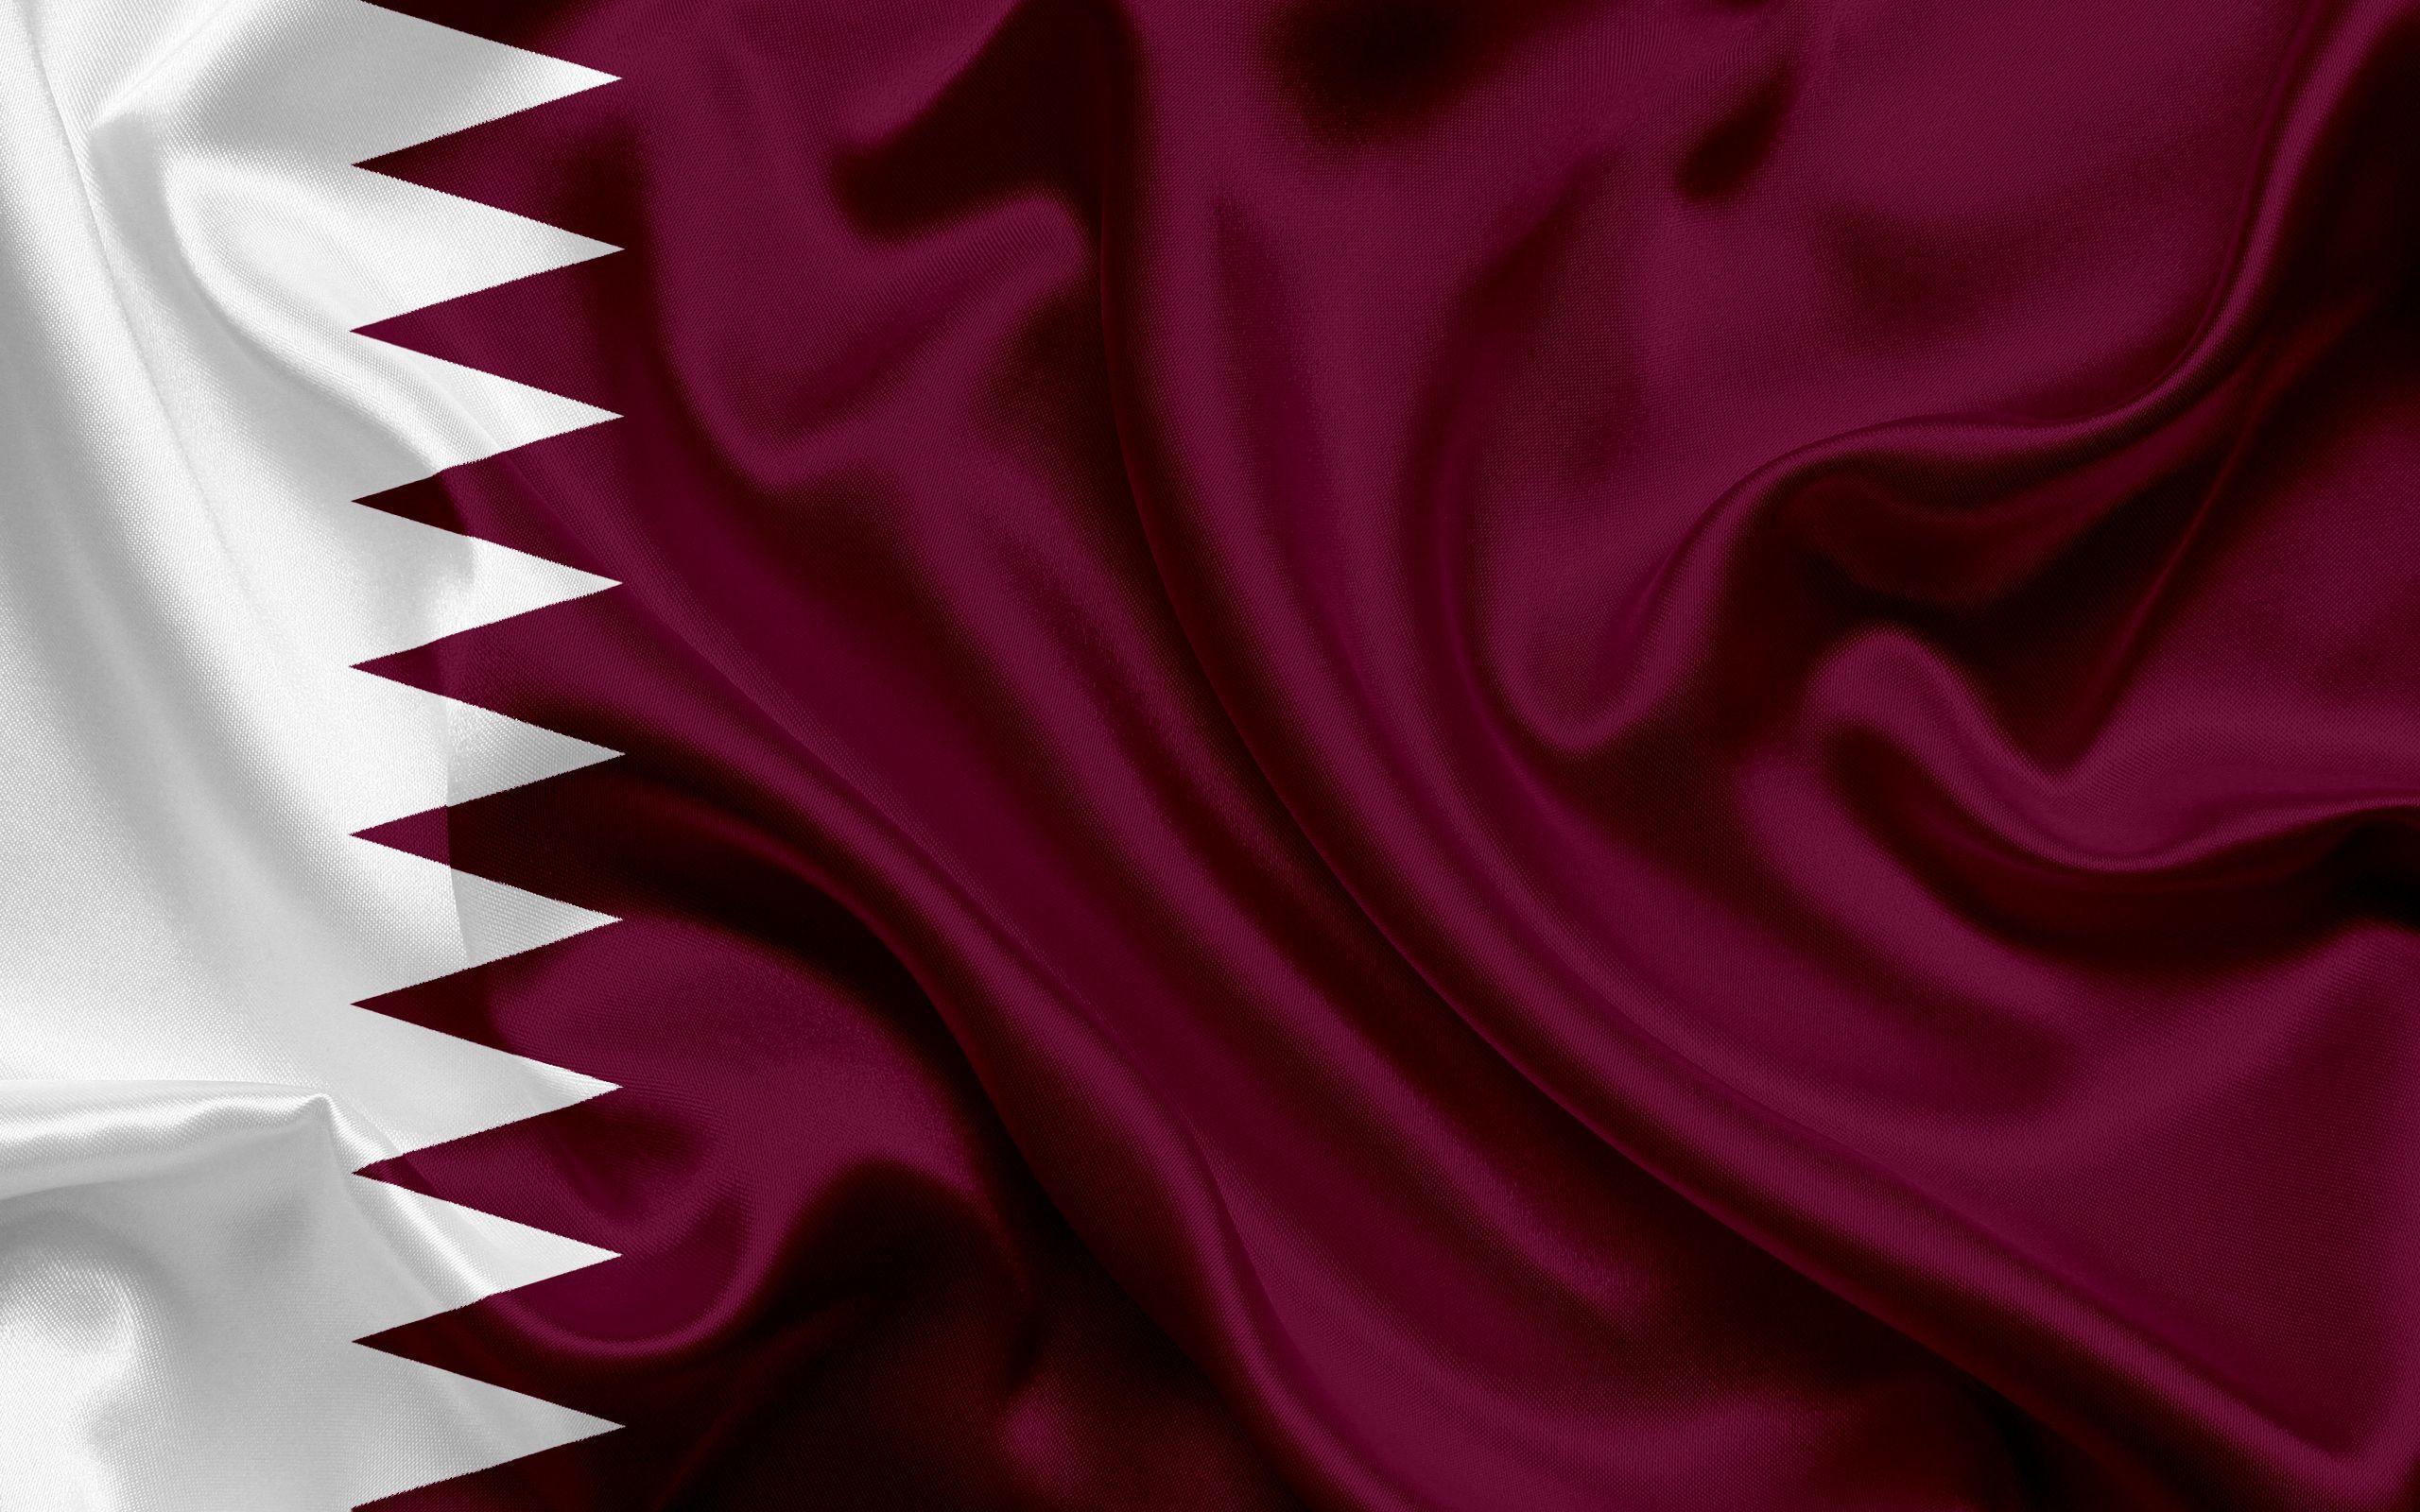 Qatar Flag : Qatar Flag Stickers Redbubble : Football fever on rtd website and on rt's live feed ...